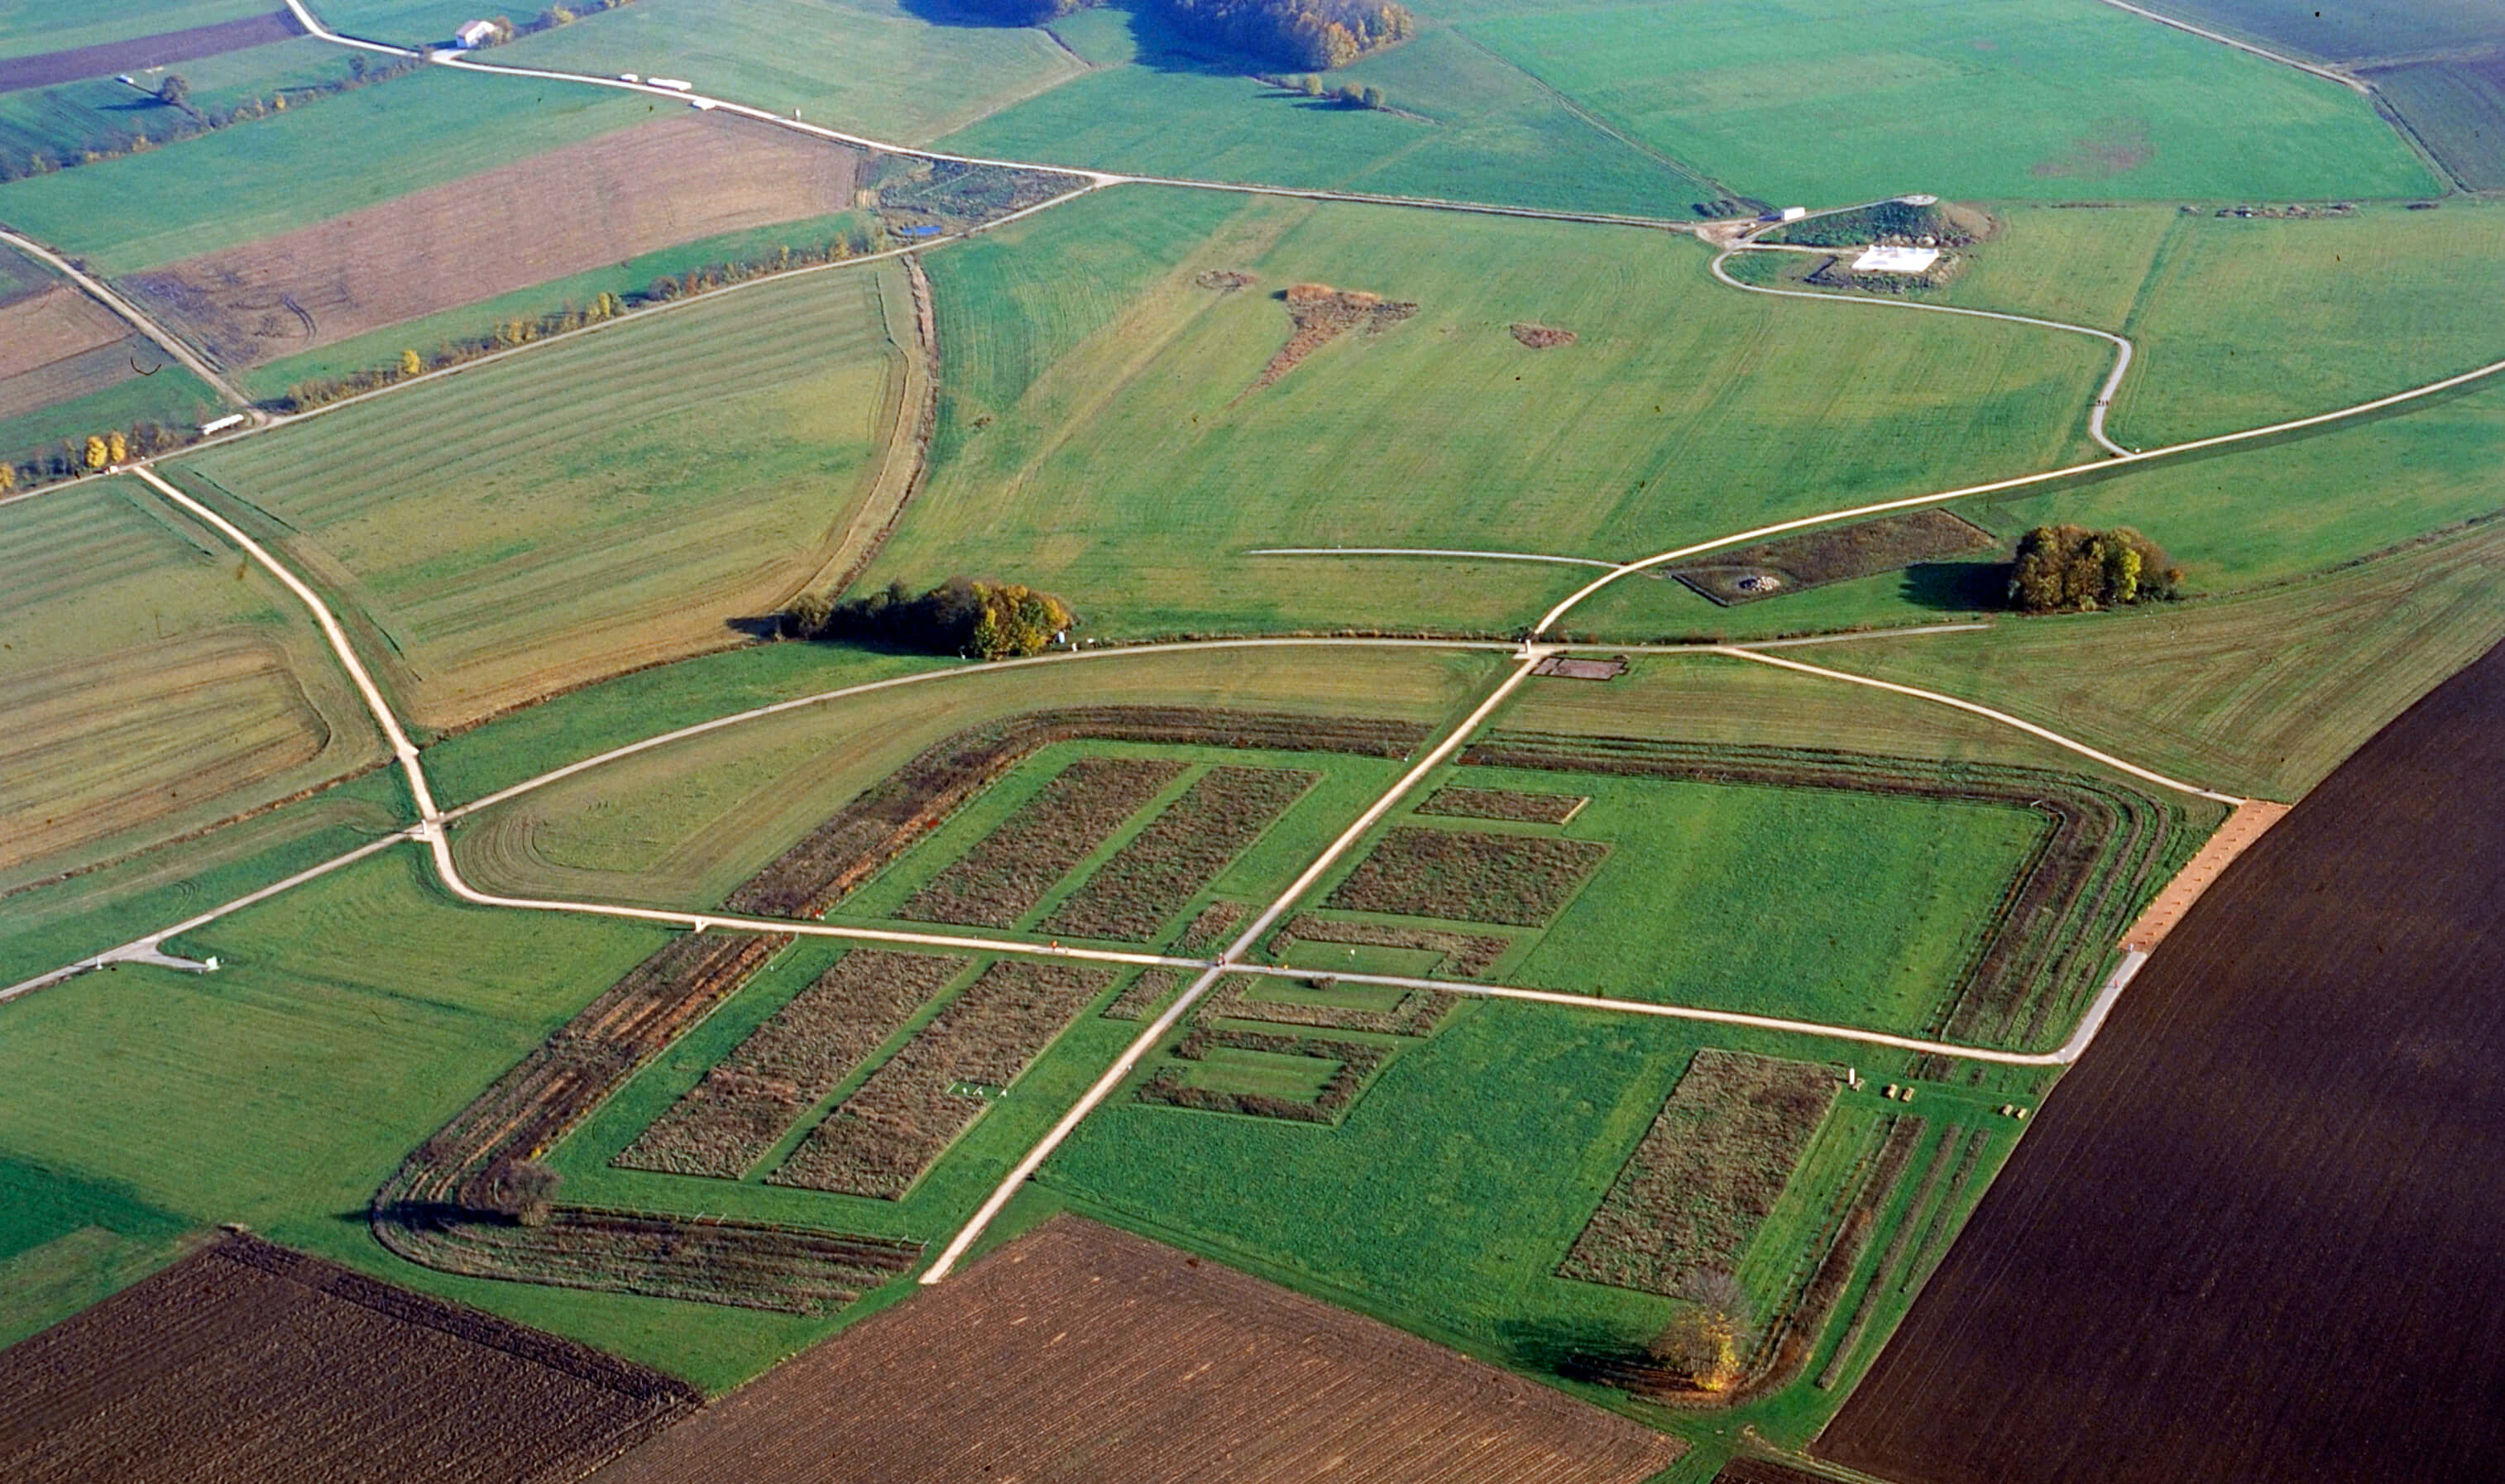 An aerial view of the planted fort Ruffenhofen as part of the Upper Germanic-Rhaetian Limes.